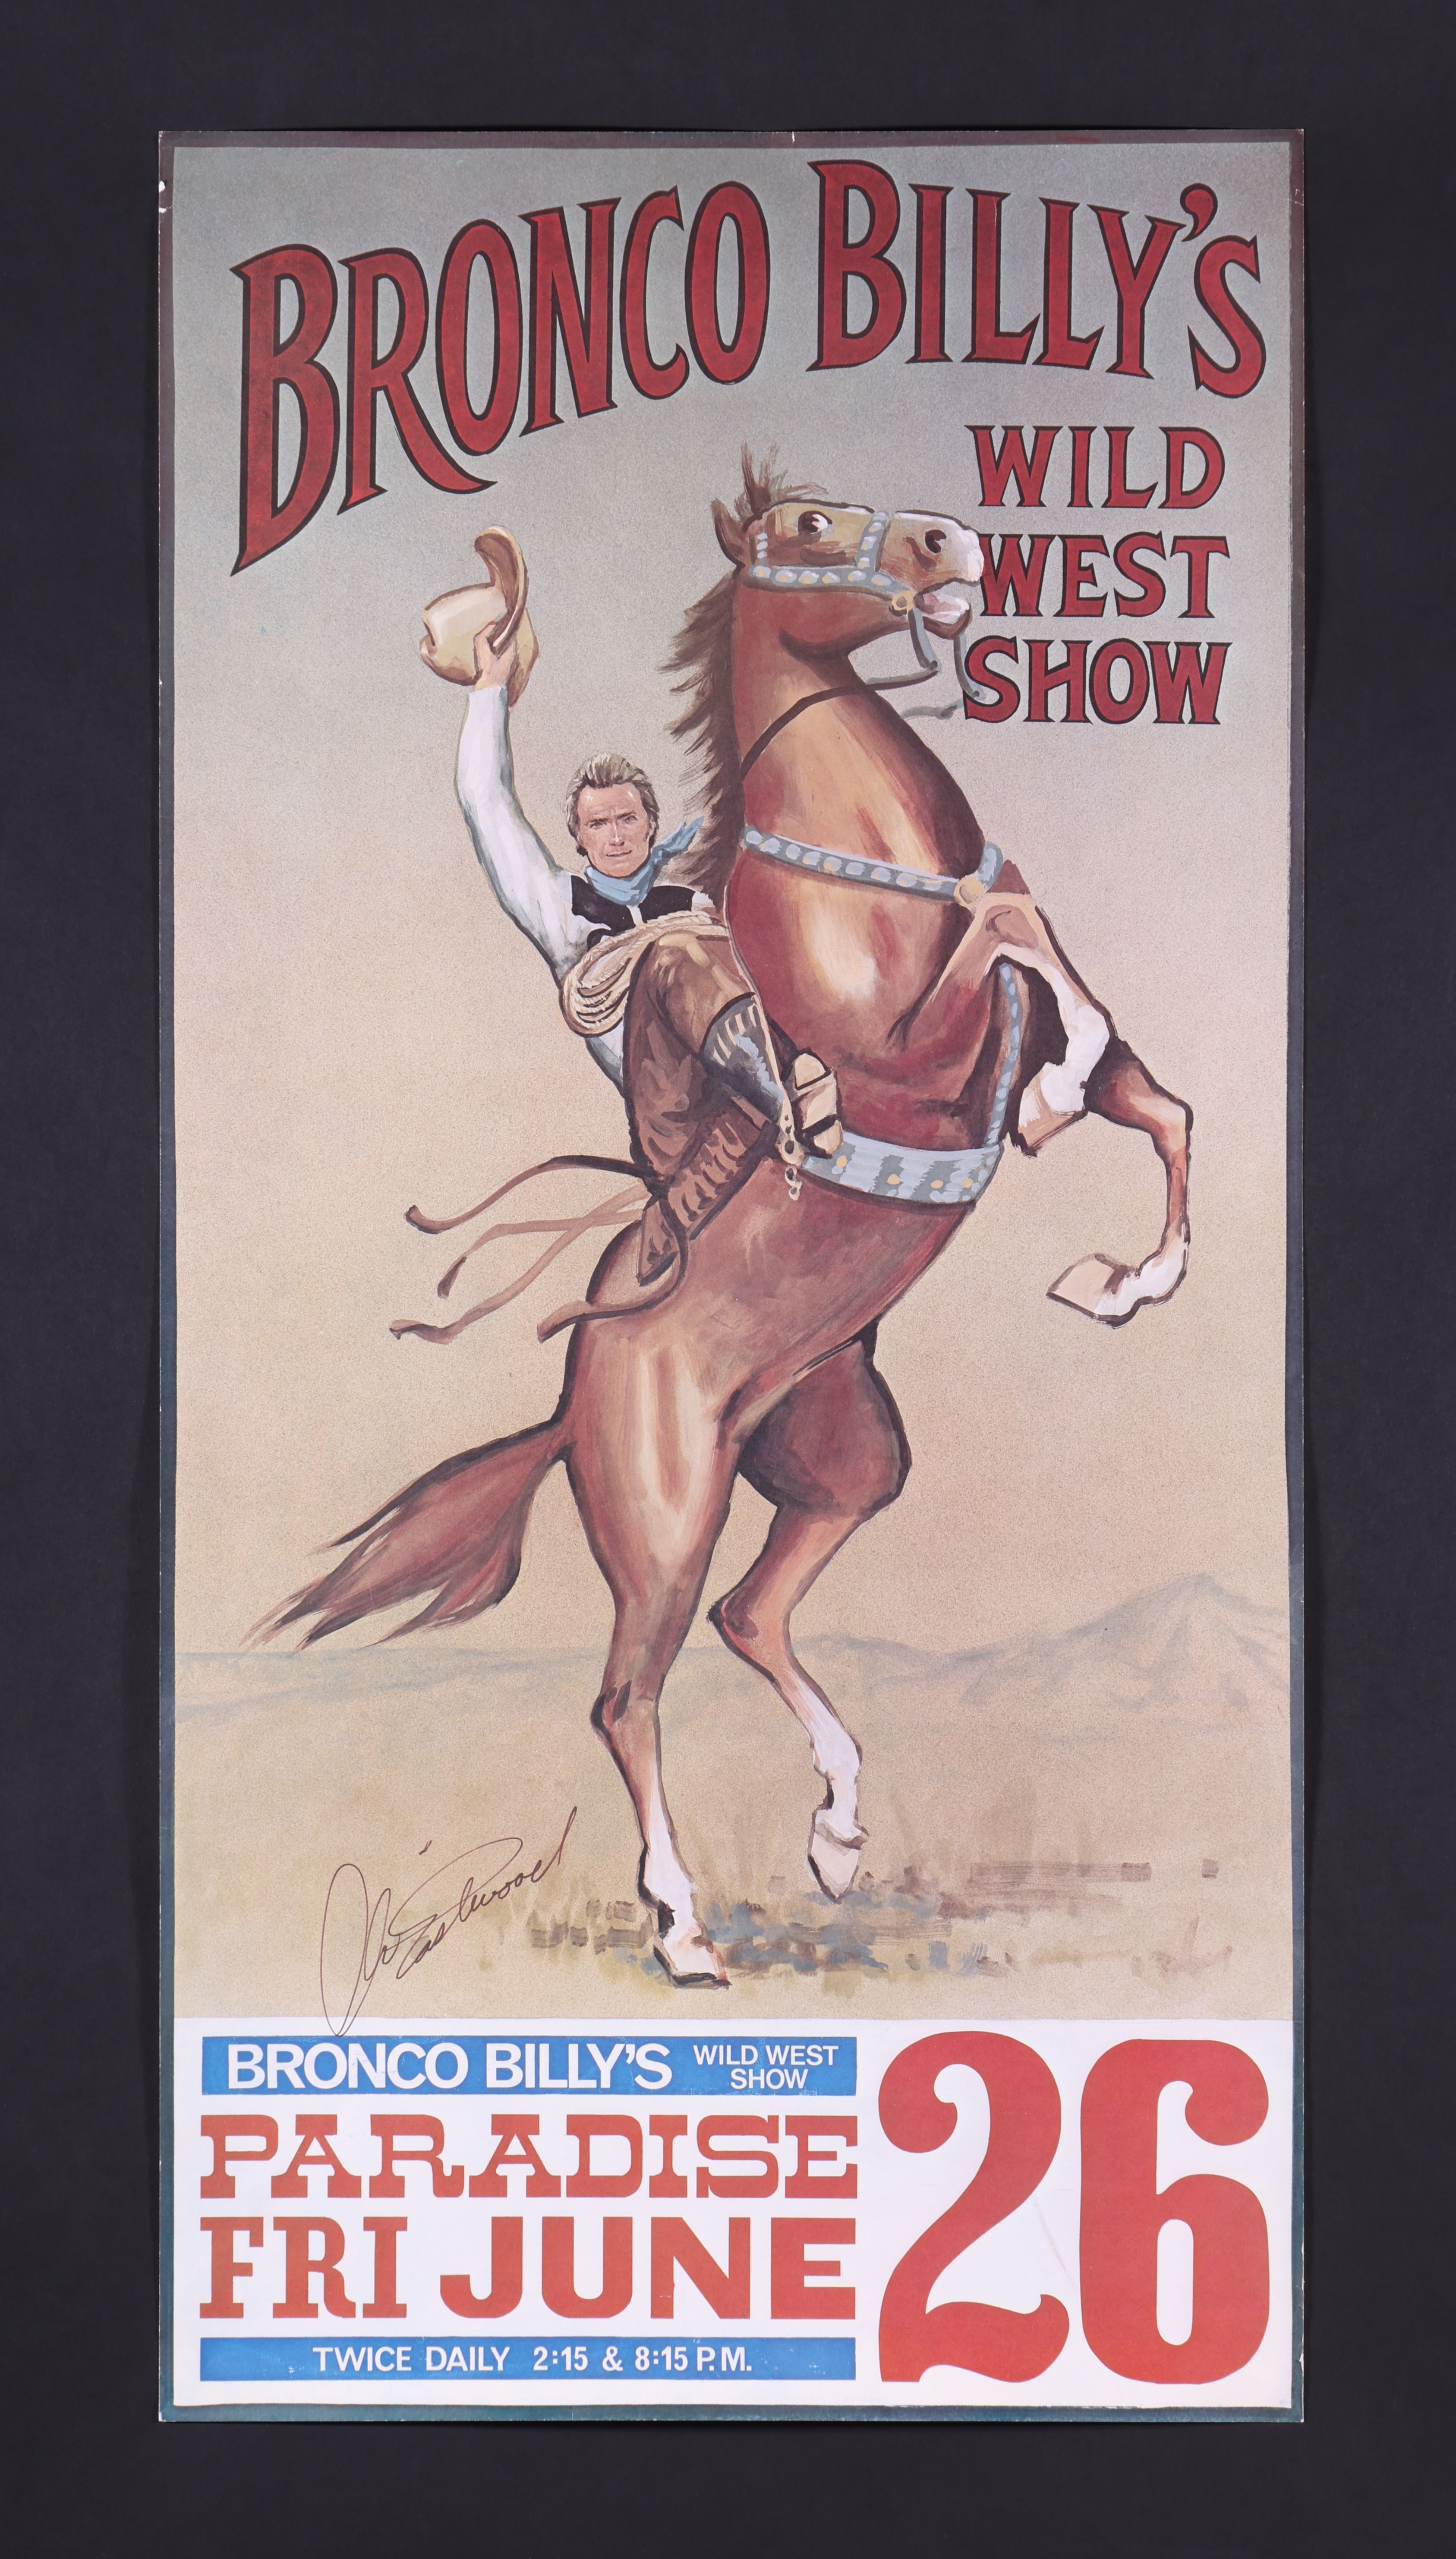 BRONCO BILLY (1980) - David Frangioni Collection: Clint Eastwood Autographed Special Promotional Pos